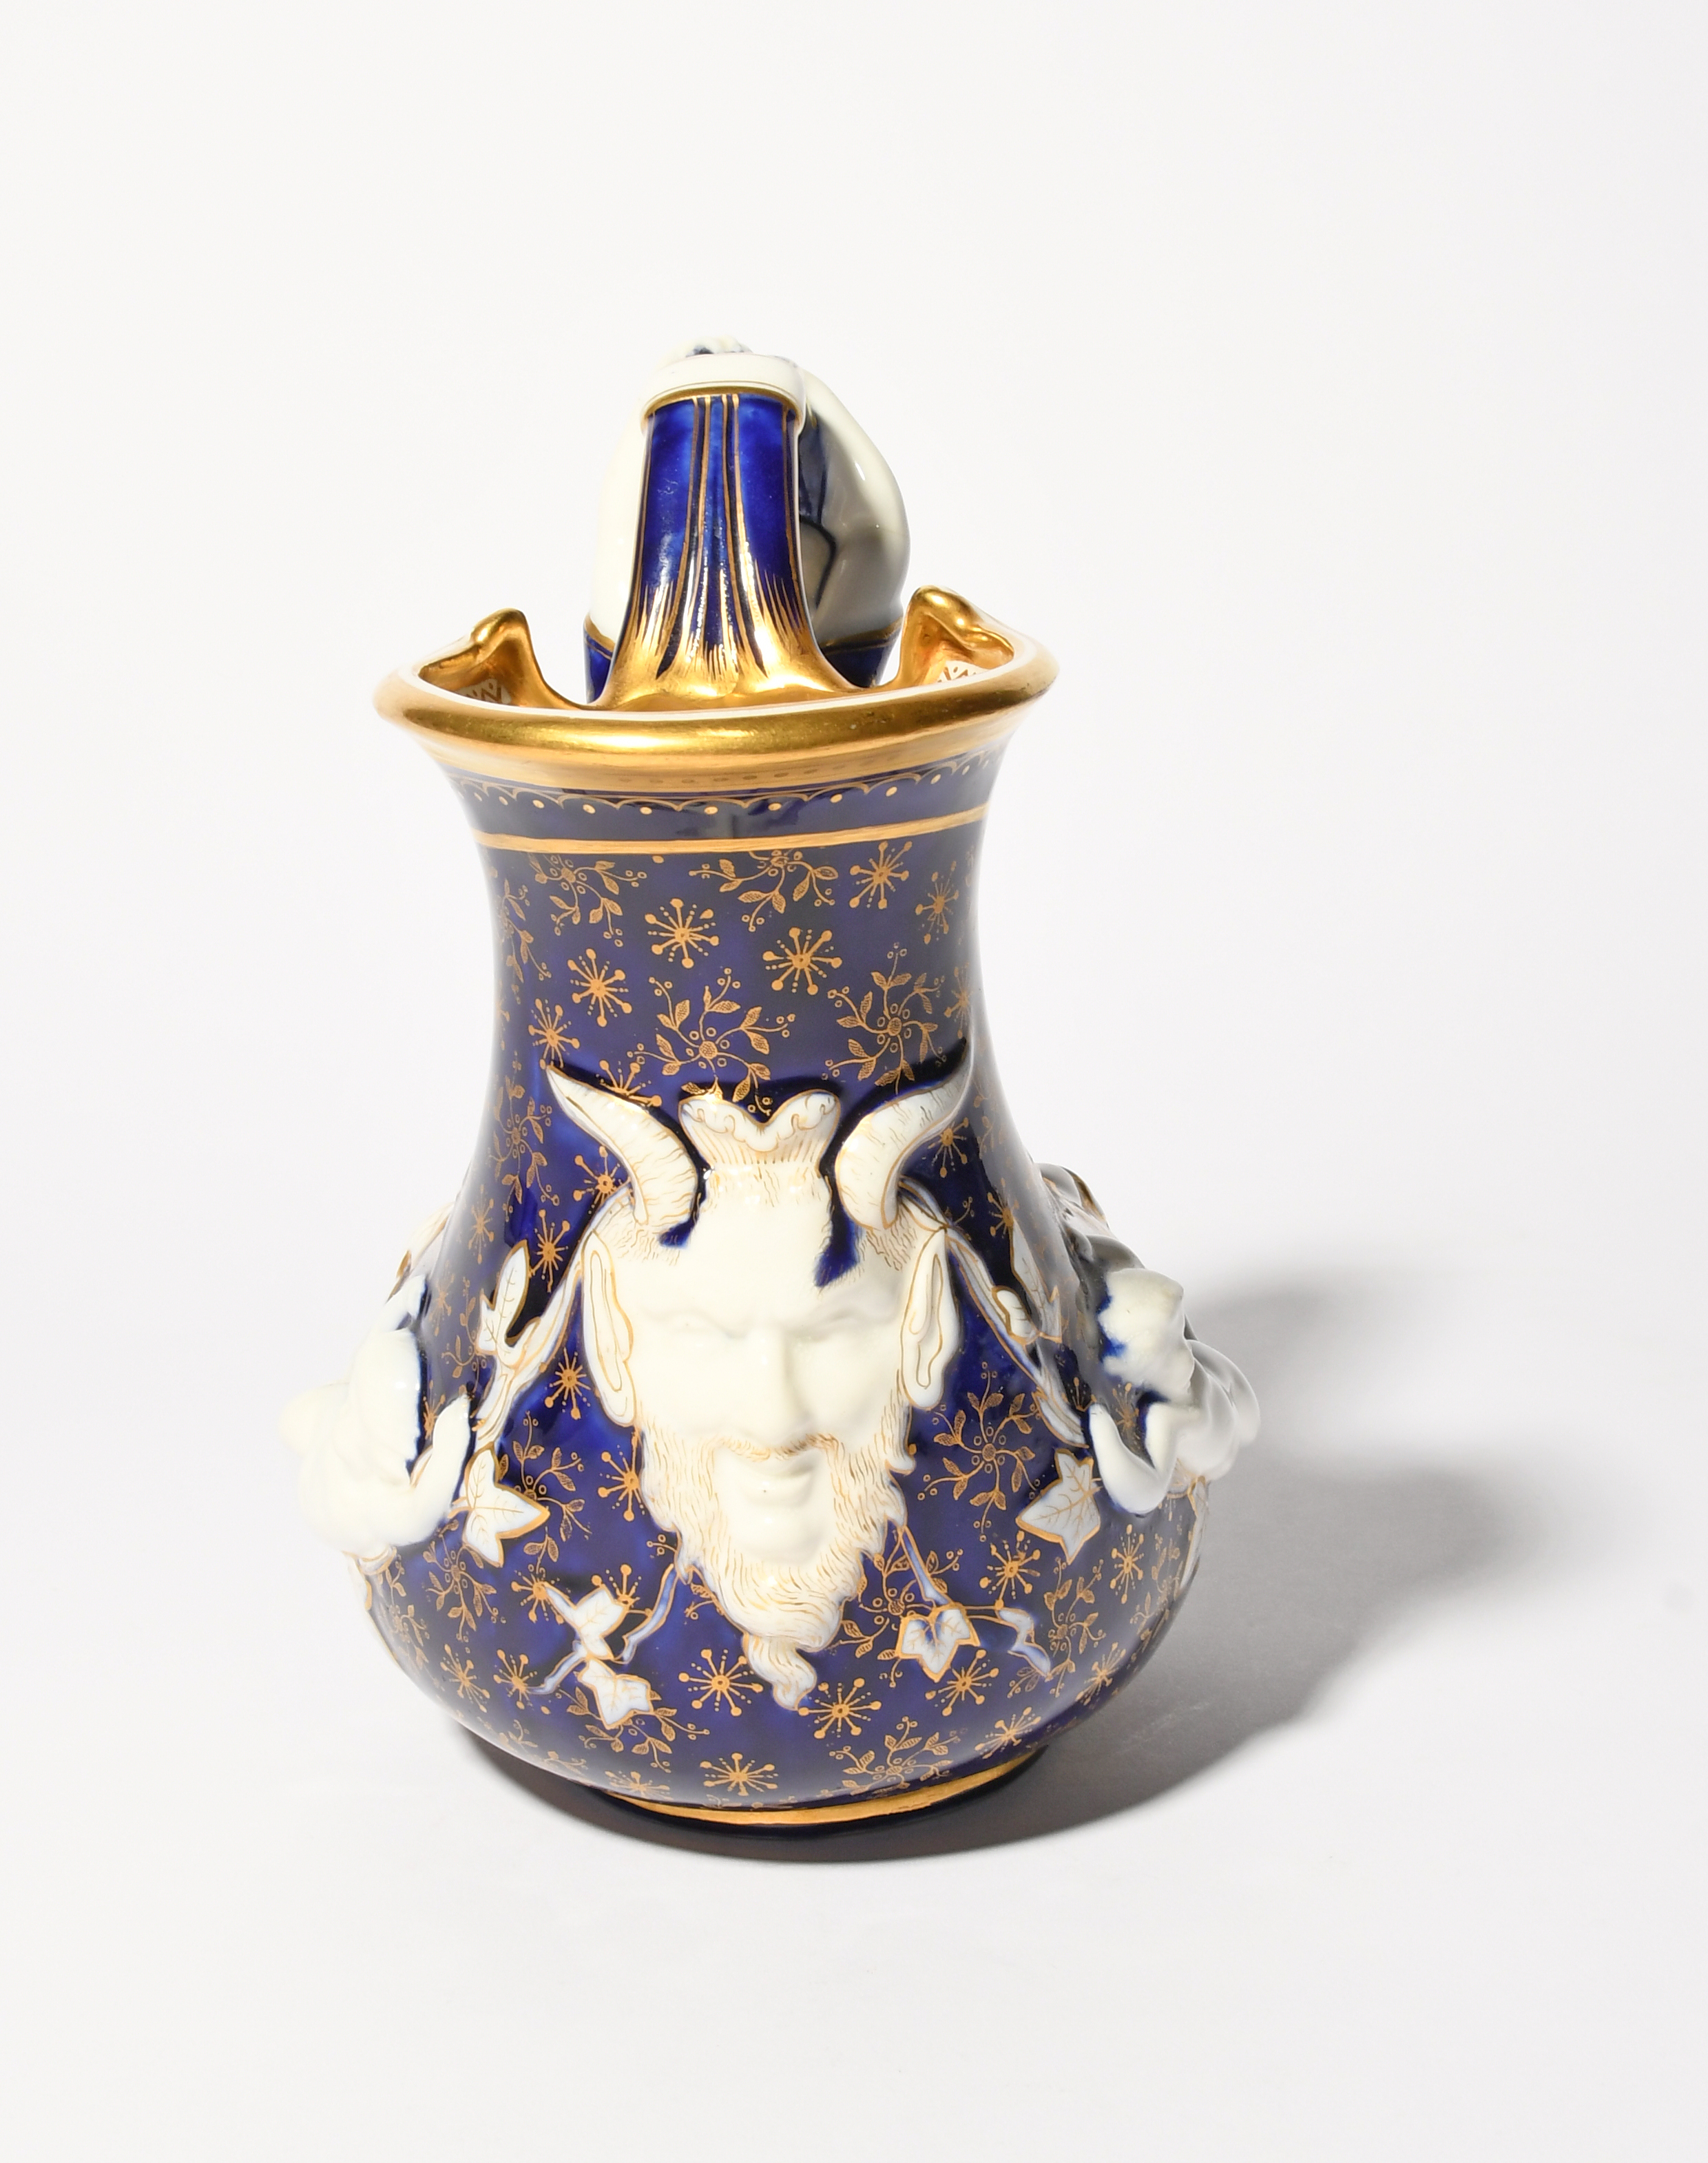 A rare Minton porcelain 'Mermaid' ewer, c.1880, of askos shape, moulded with putti and a horned - Image 4 of 5